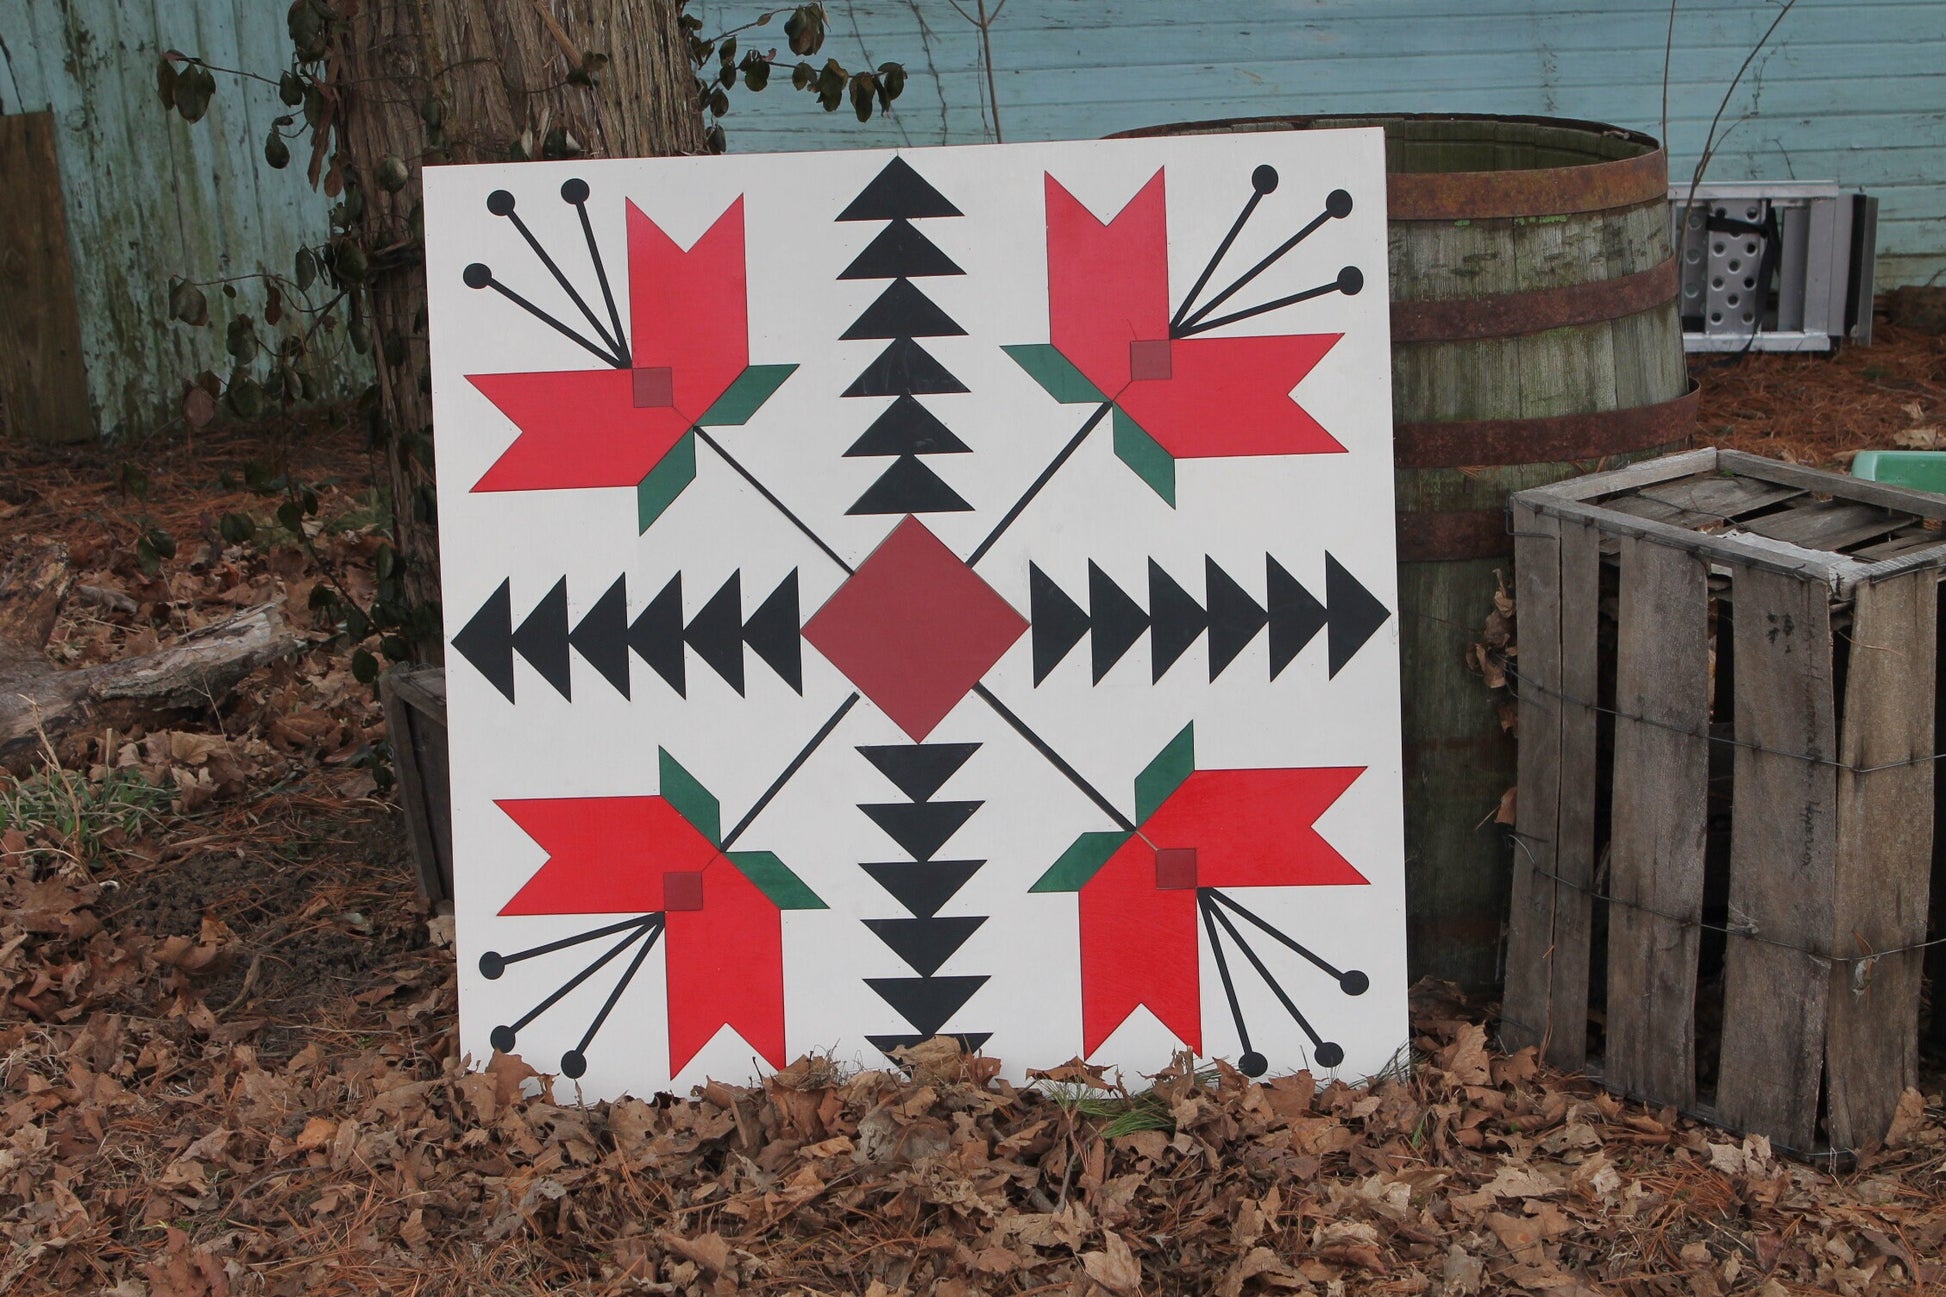 Barn Quilt, Tulip, Flower, Floral, Red, Wood Barn Quilt, Barn Decor, Vintage, Rustic, Mosaic, Handmade, Primitive, Wood, Laser Cut Out,Large